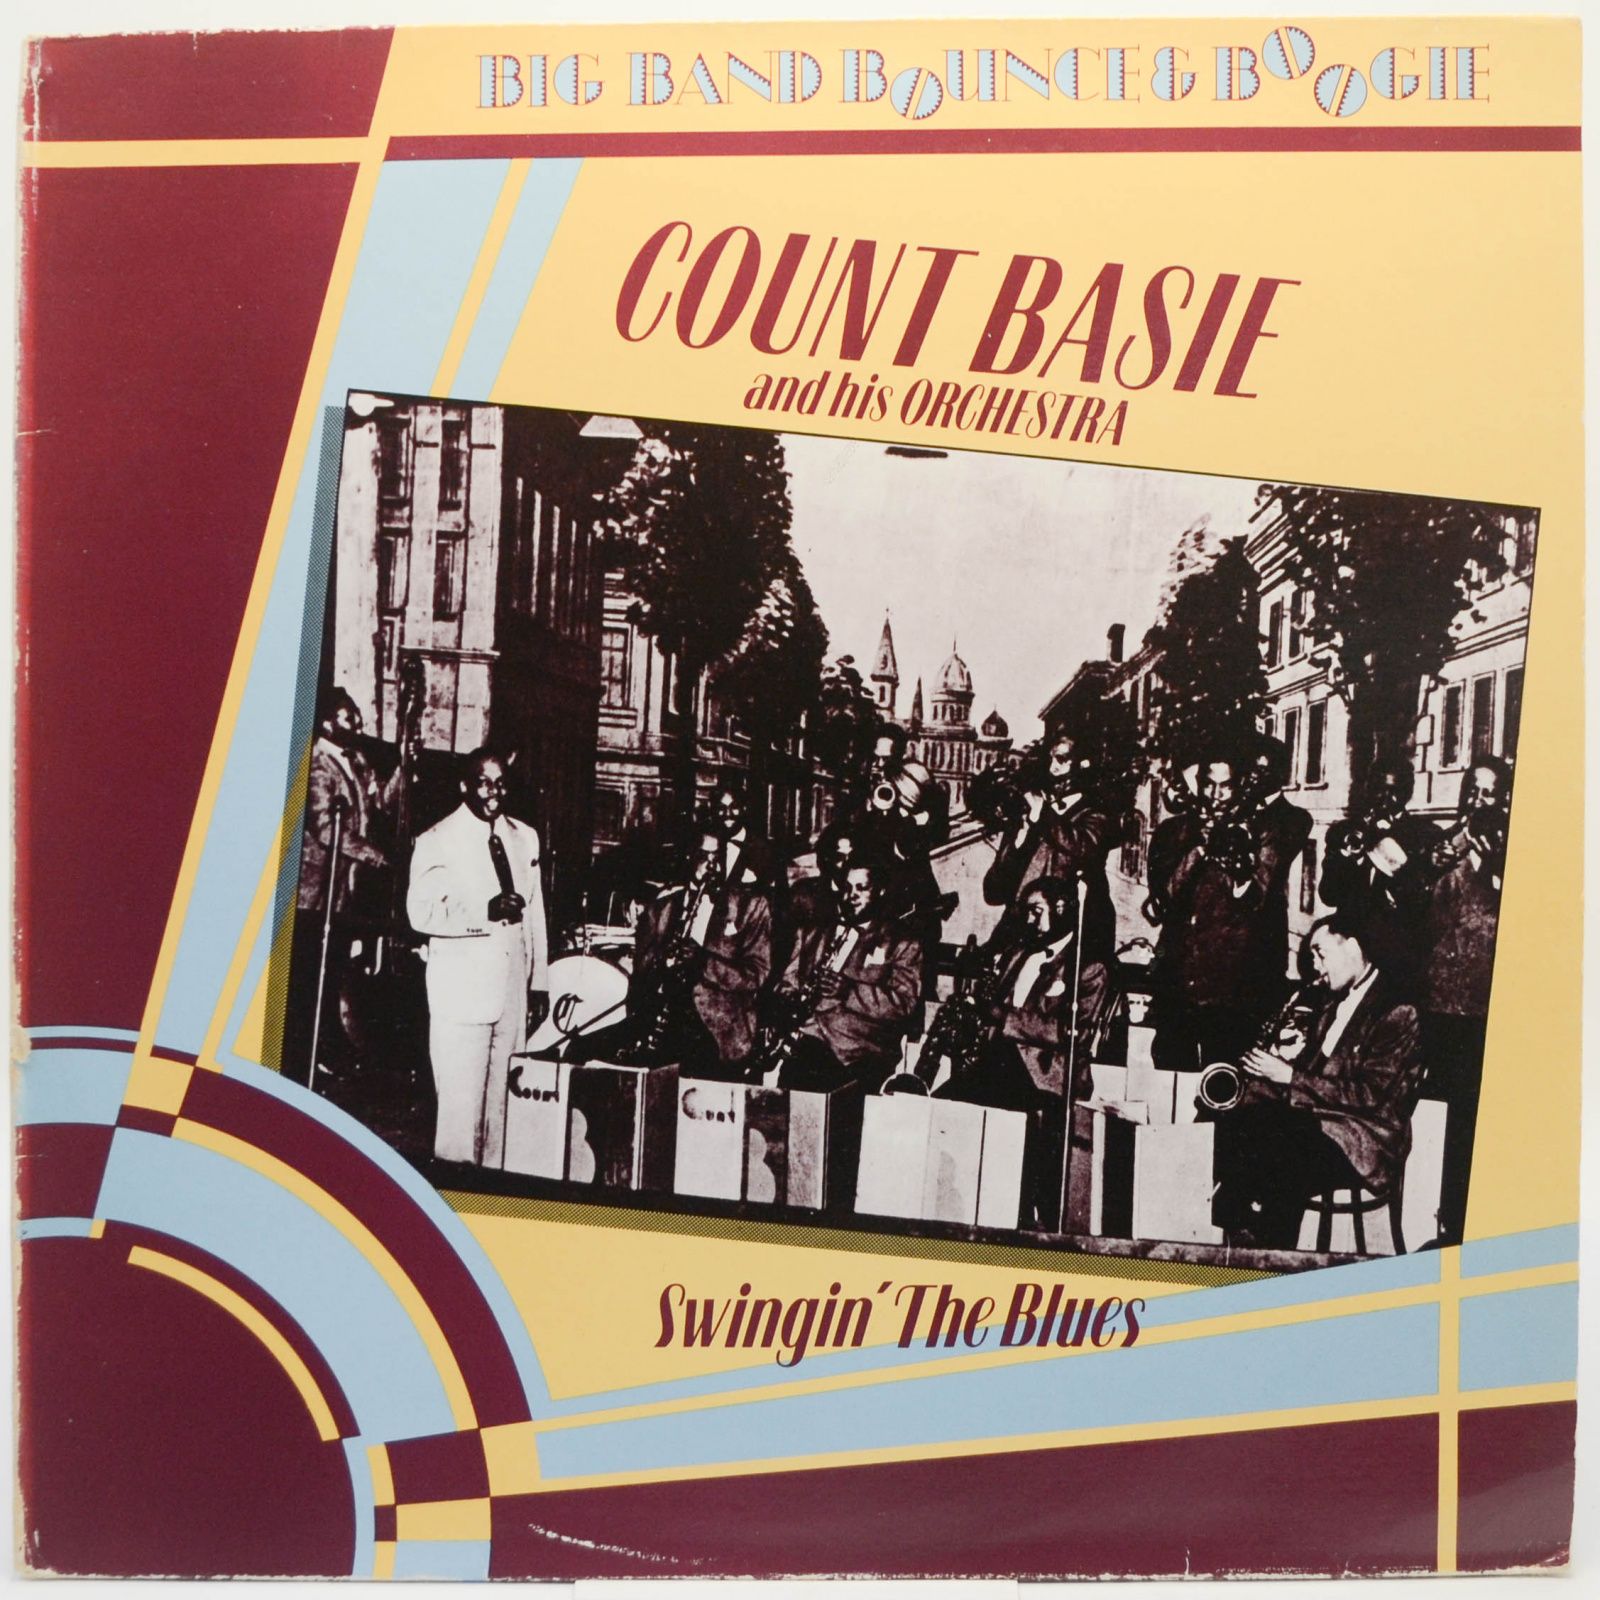 Count Basie And His Orchestra — Swingin' The Blues, 1983